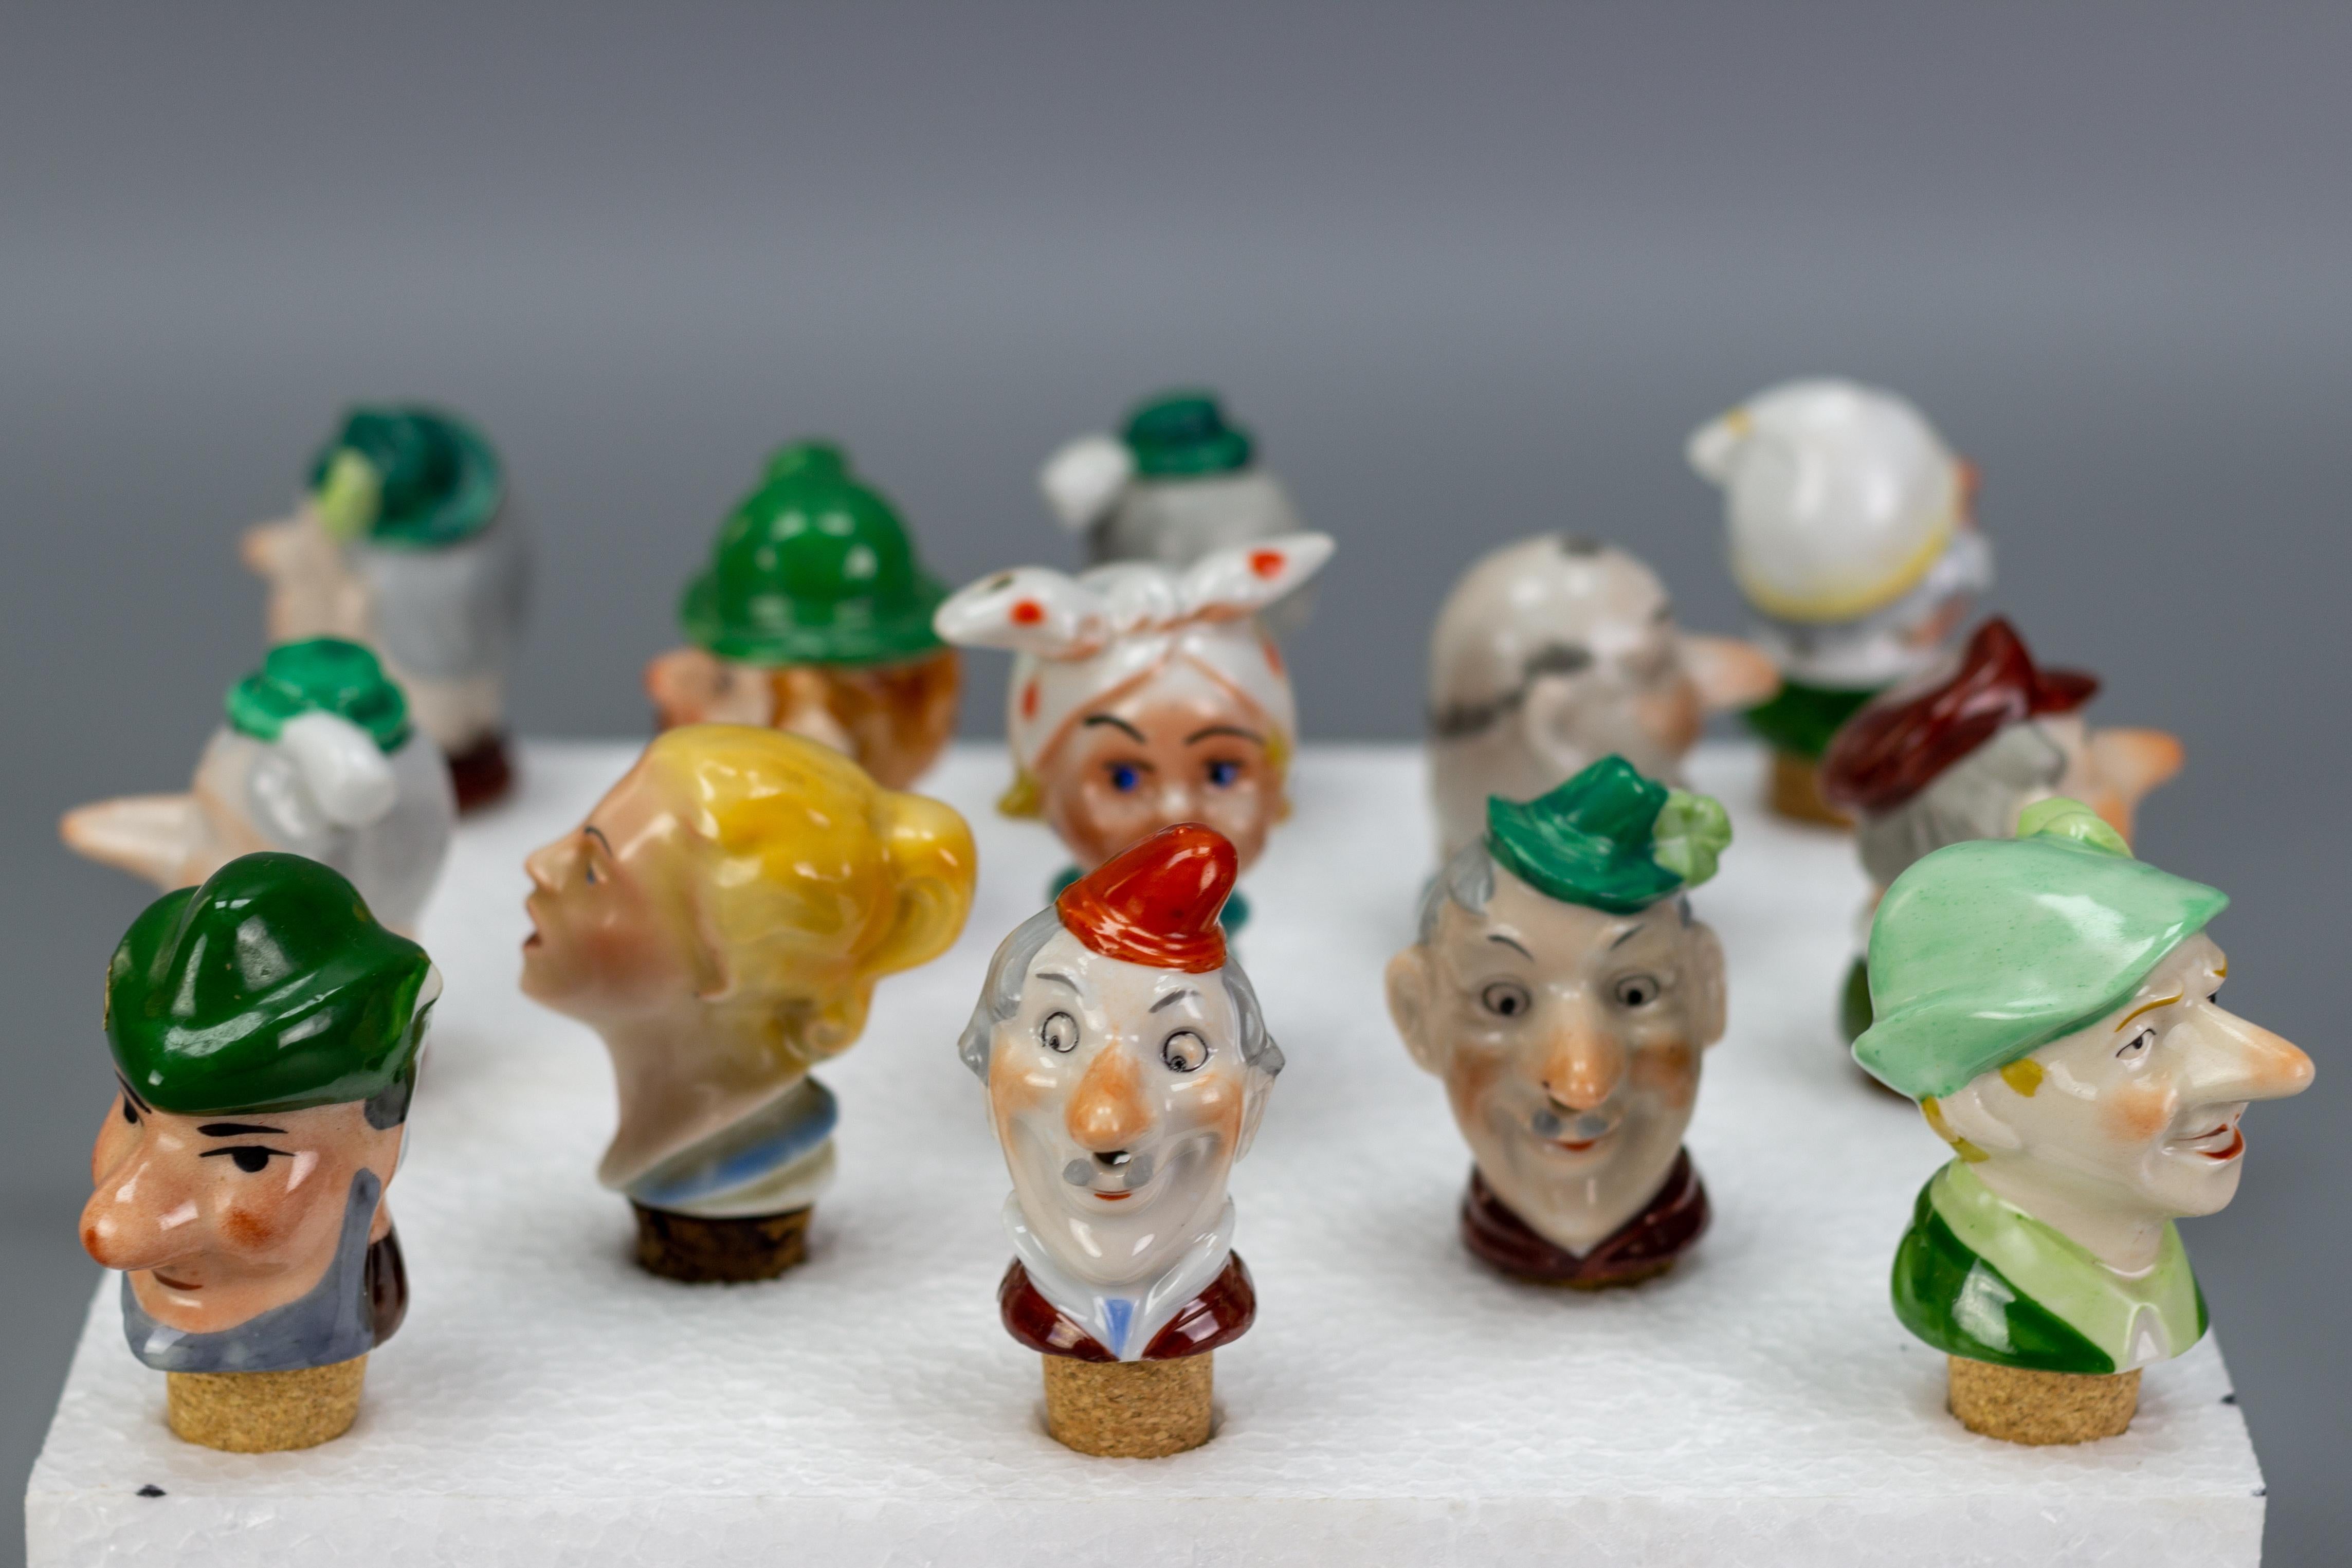 Adorable thirteen porcelain cork pourers or bottle stoppers with figural porcelain heads of eleven cheerful men and two beautiful girls, Germany, 1930s.
Ideal decoration - a great idea to surprise your guests or a very interesting gift.
Dimensions